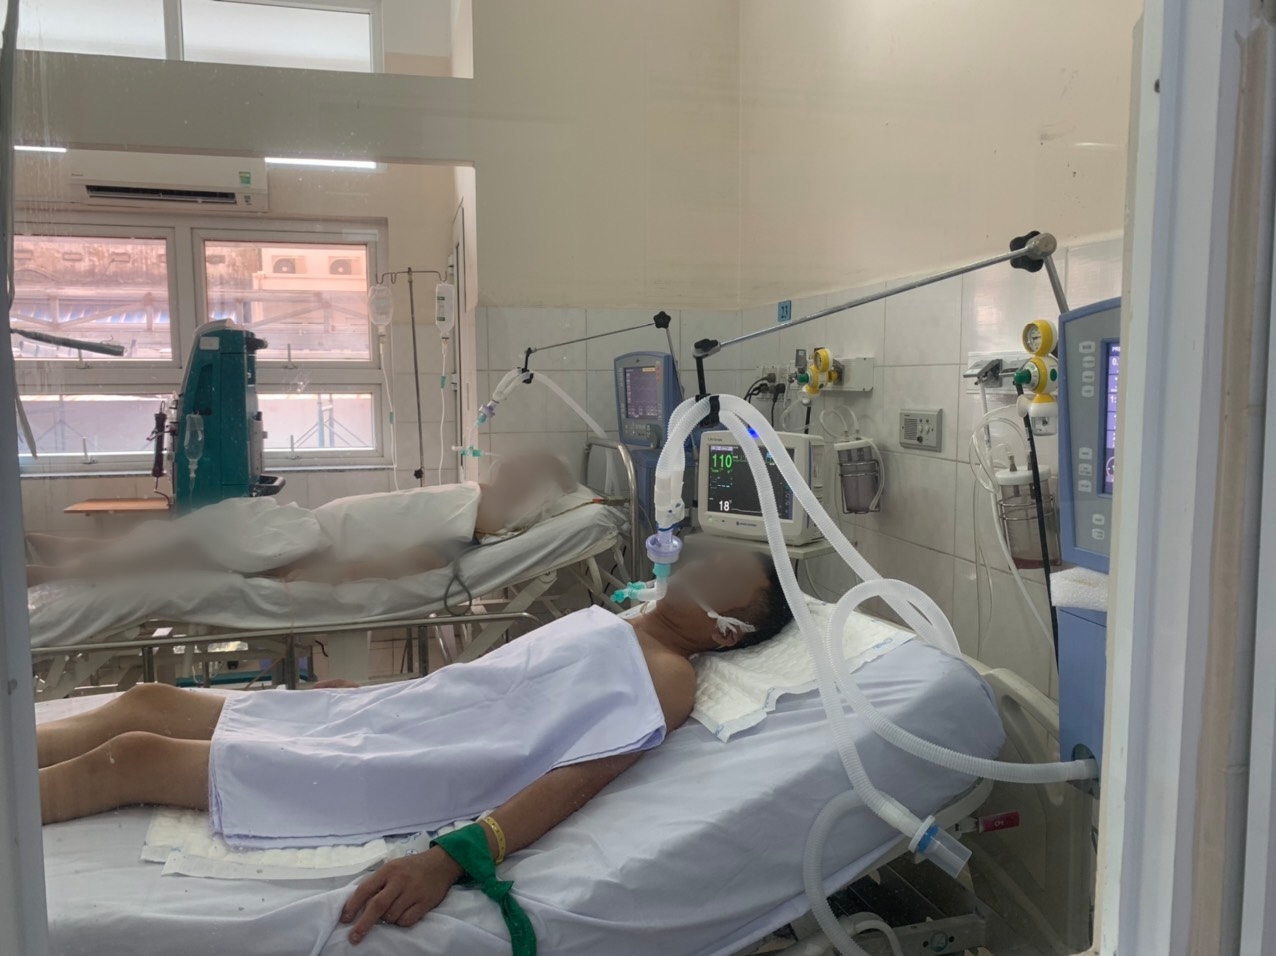 Patients are treated for alcohol poisoning at Thong Nhat Hospital in Ho Chi Minh City in this supplied photo.